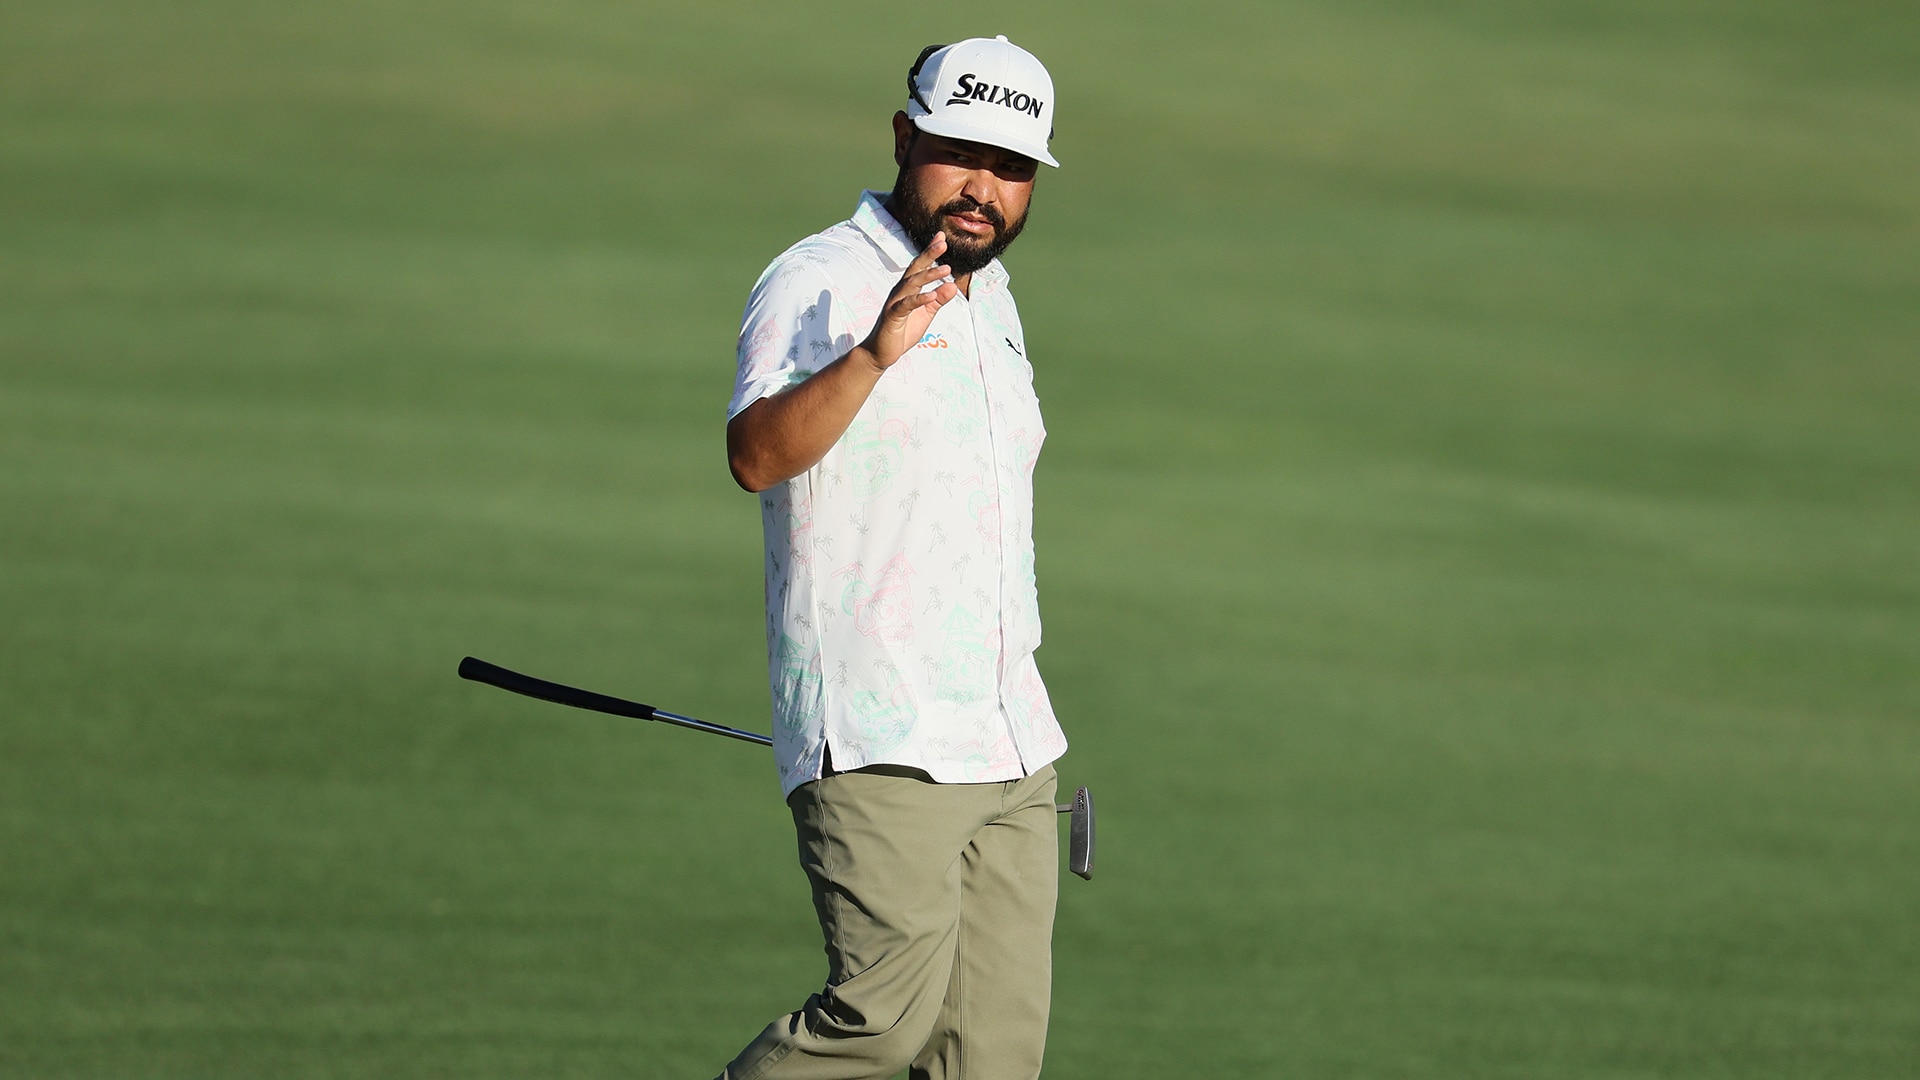 When it comes to his untucked shirt, J.J. Spaun unbothered by the haters